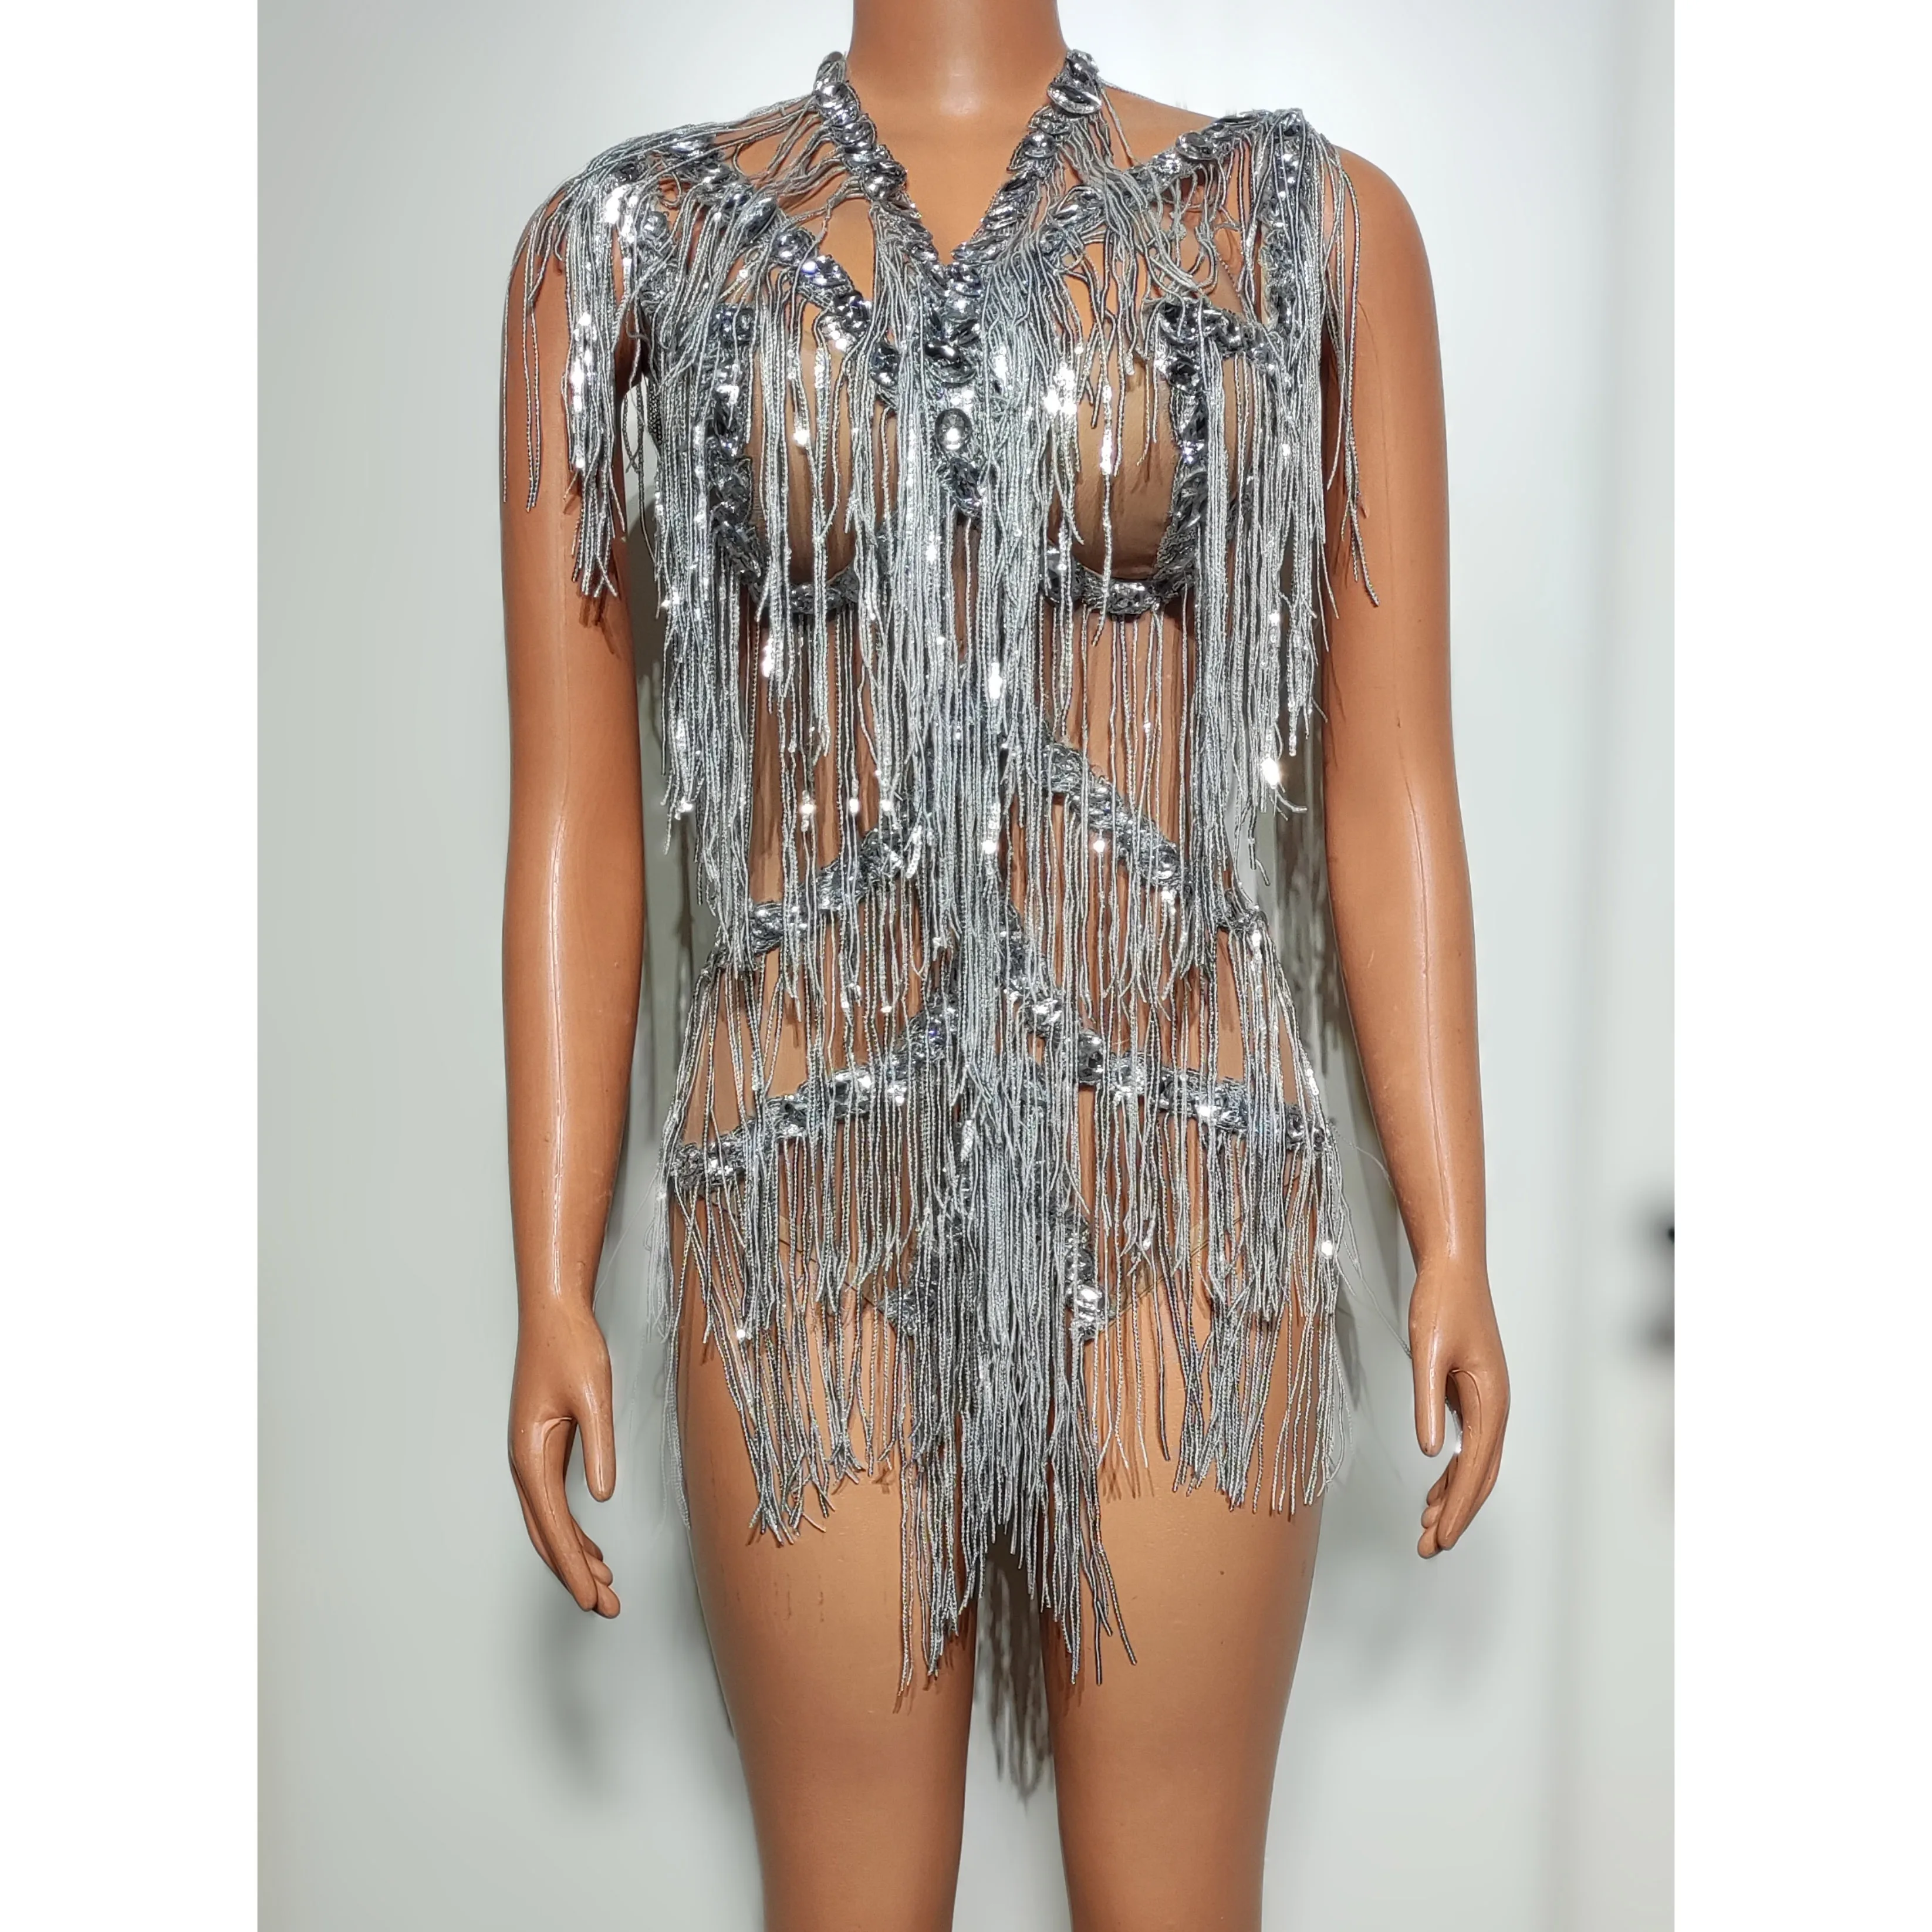 

Shiny Silver Fringed Bodysuit Pole Dance Costume Dj Ds Party Rave Clothing Nightclub Singer Dancer Performance Clothes